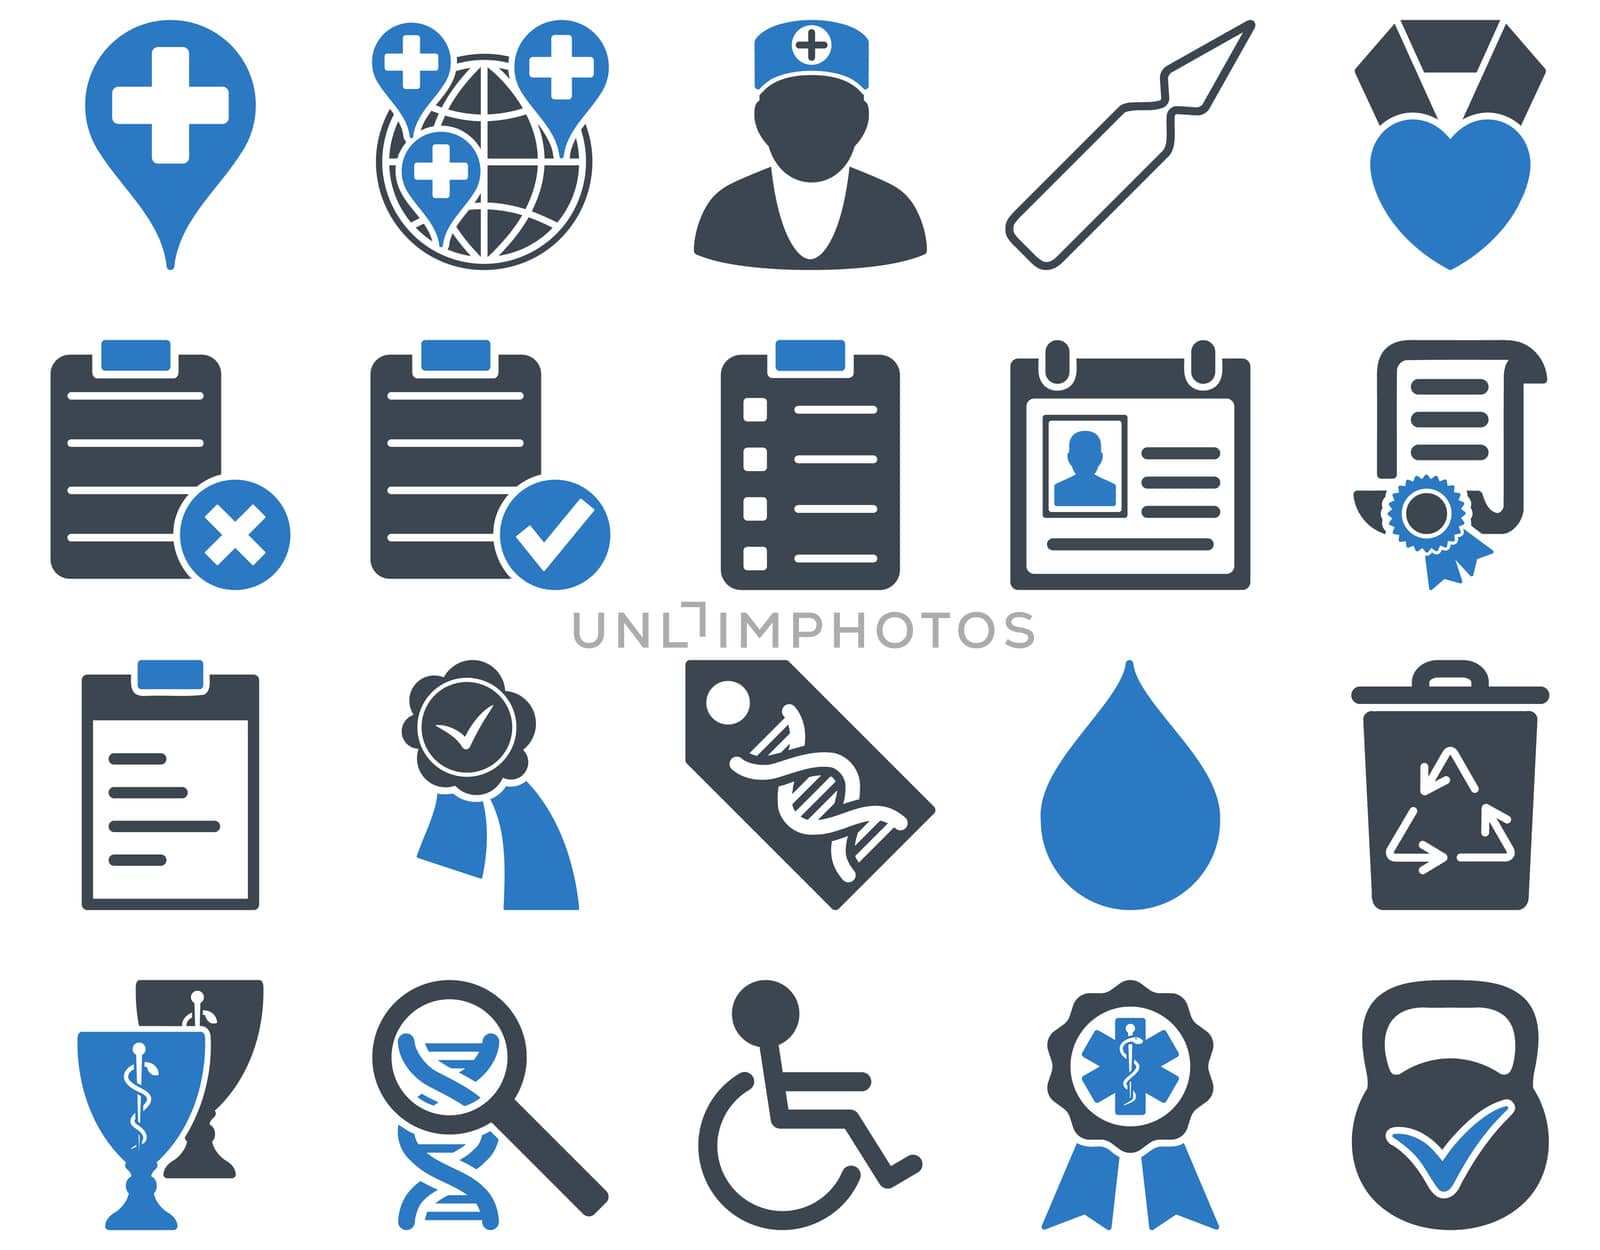 Medical icon set. Style: bicolor icons drawn with smooth blue colors on a white background.